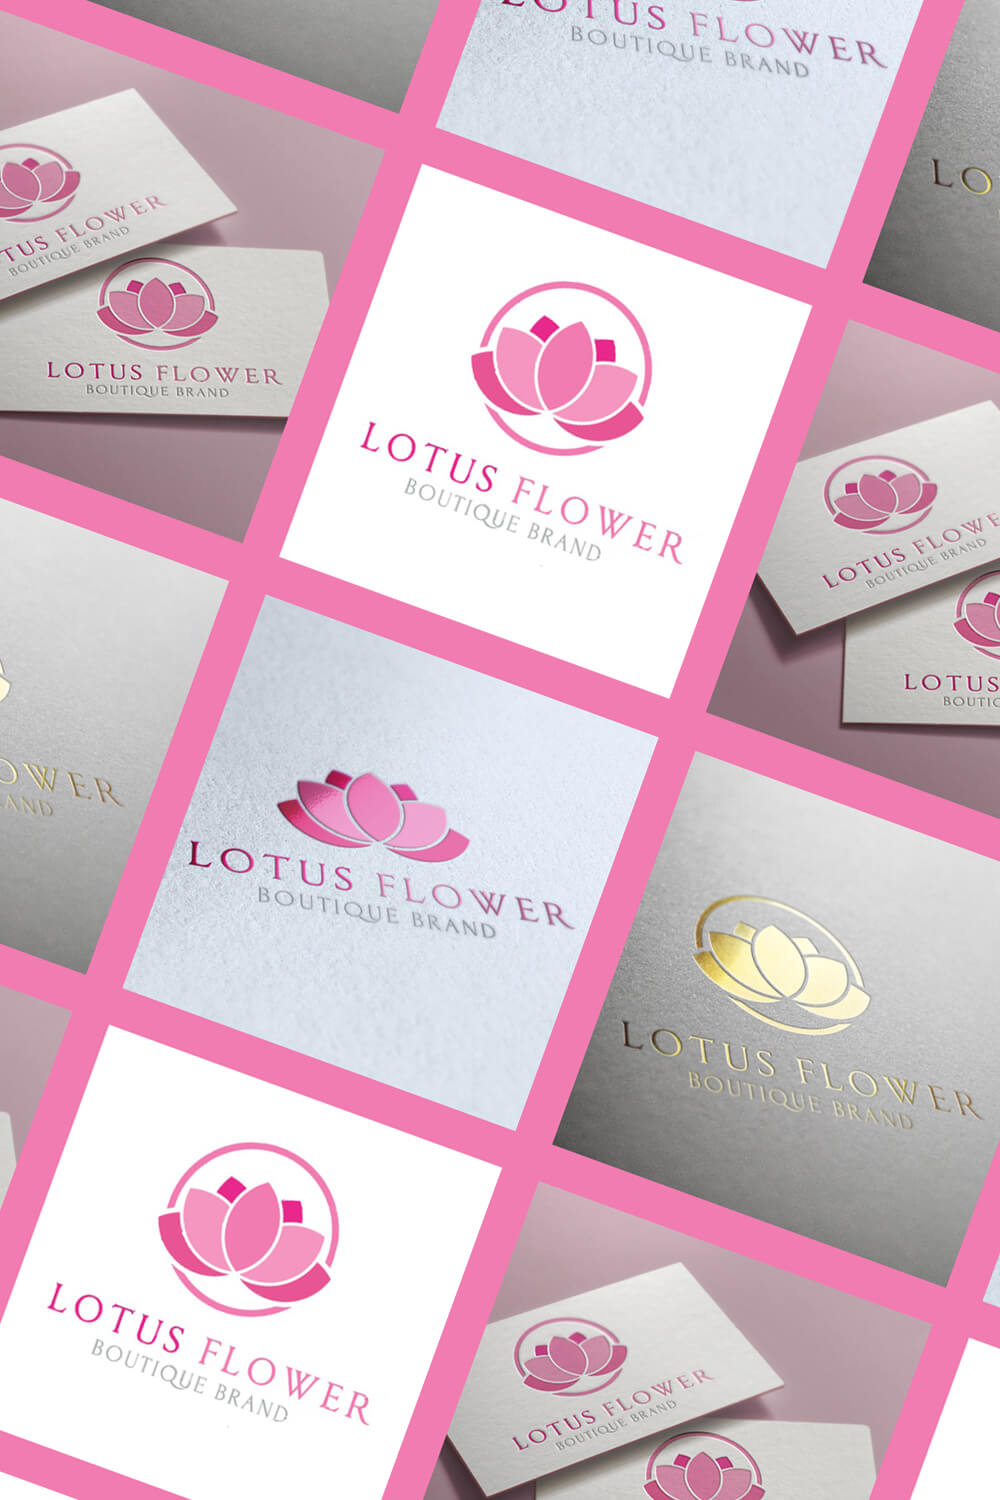 Four variants of the lotus flower logo in pink and gold colors on a white, pink and gray background in pink frames at an angle.